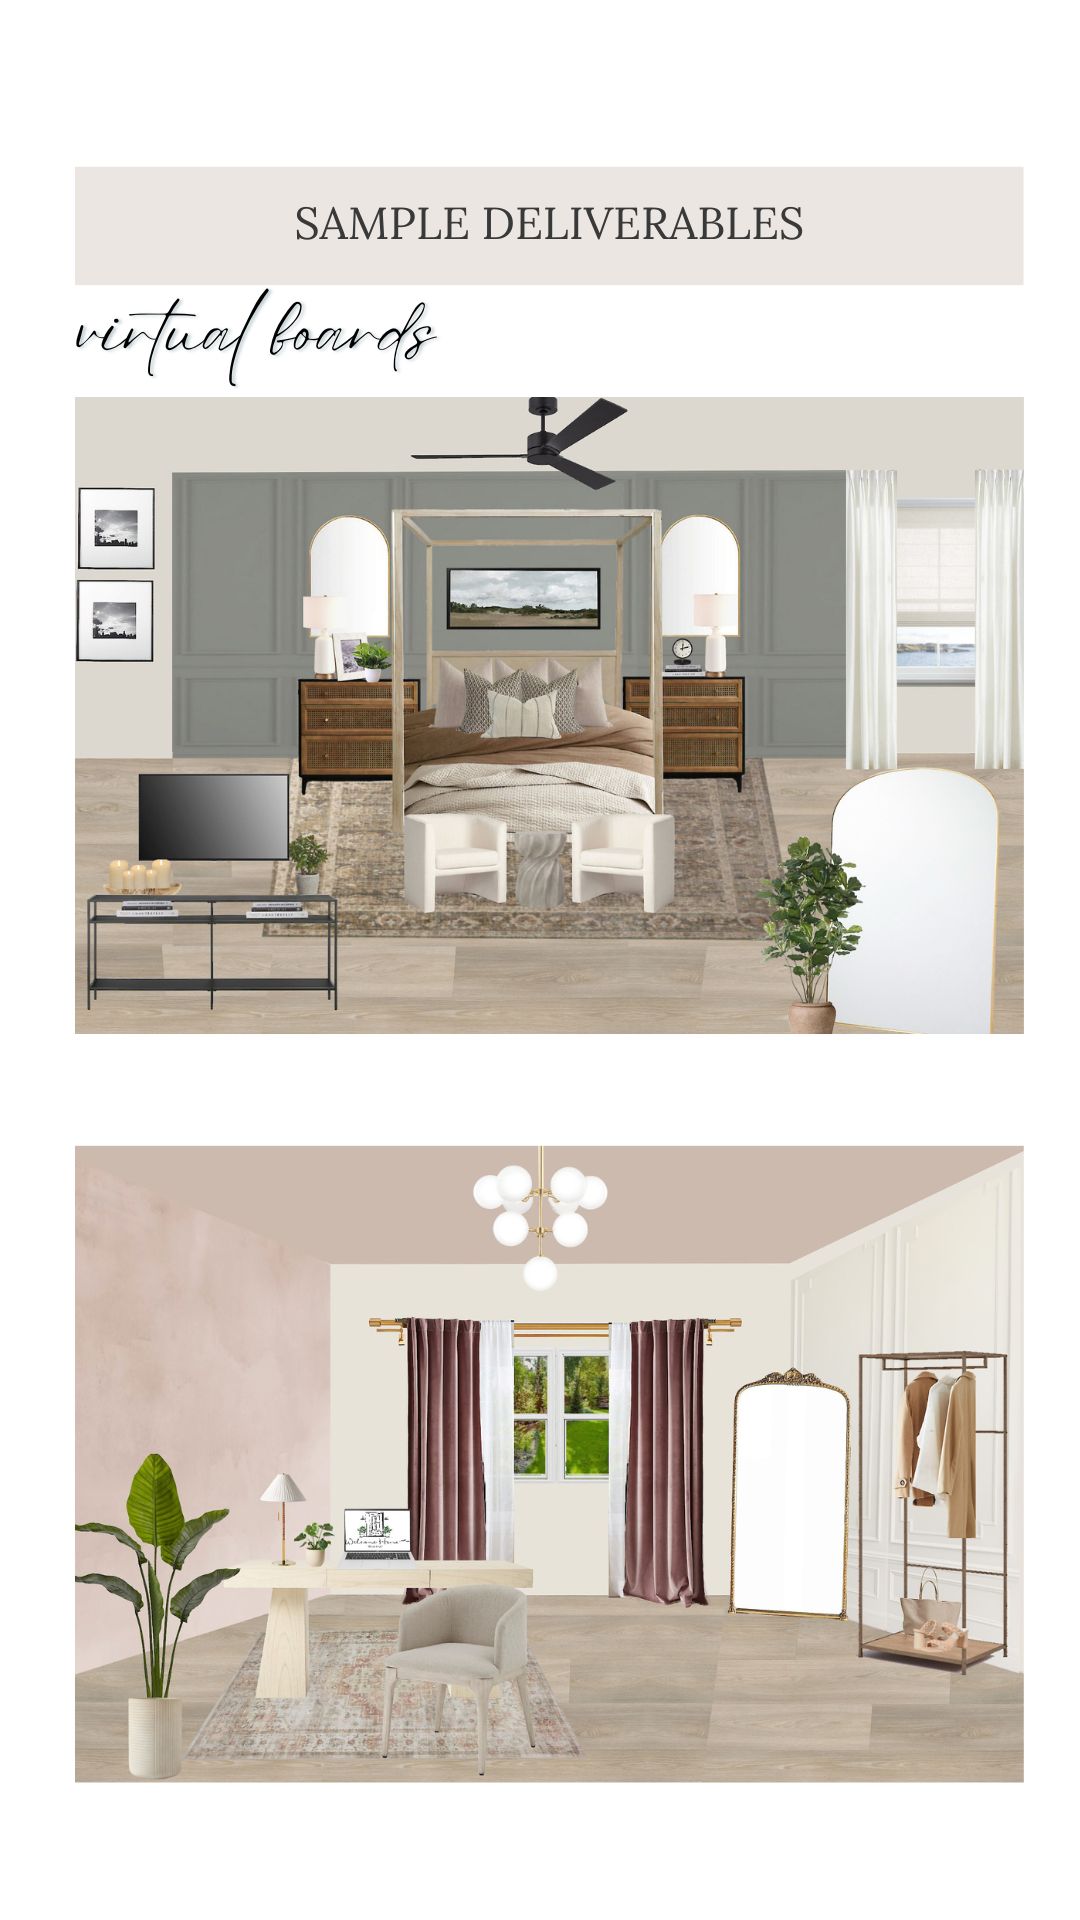 An example of a digital design board Welcome Home Styling created for a client.